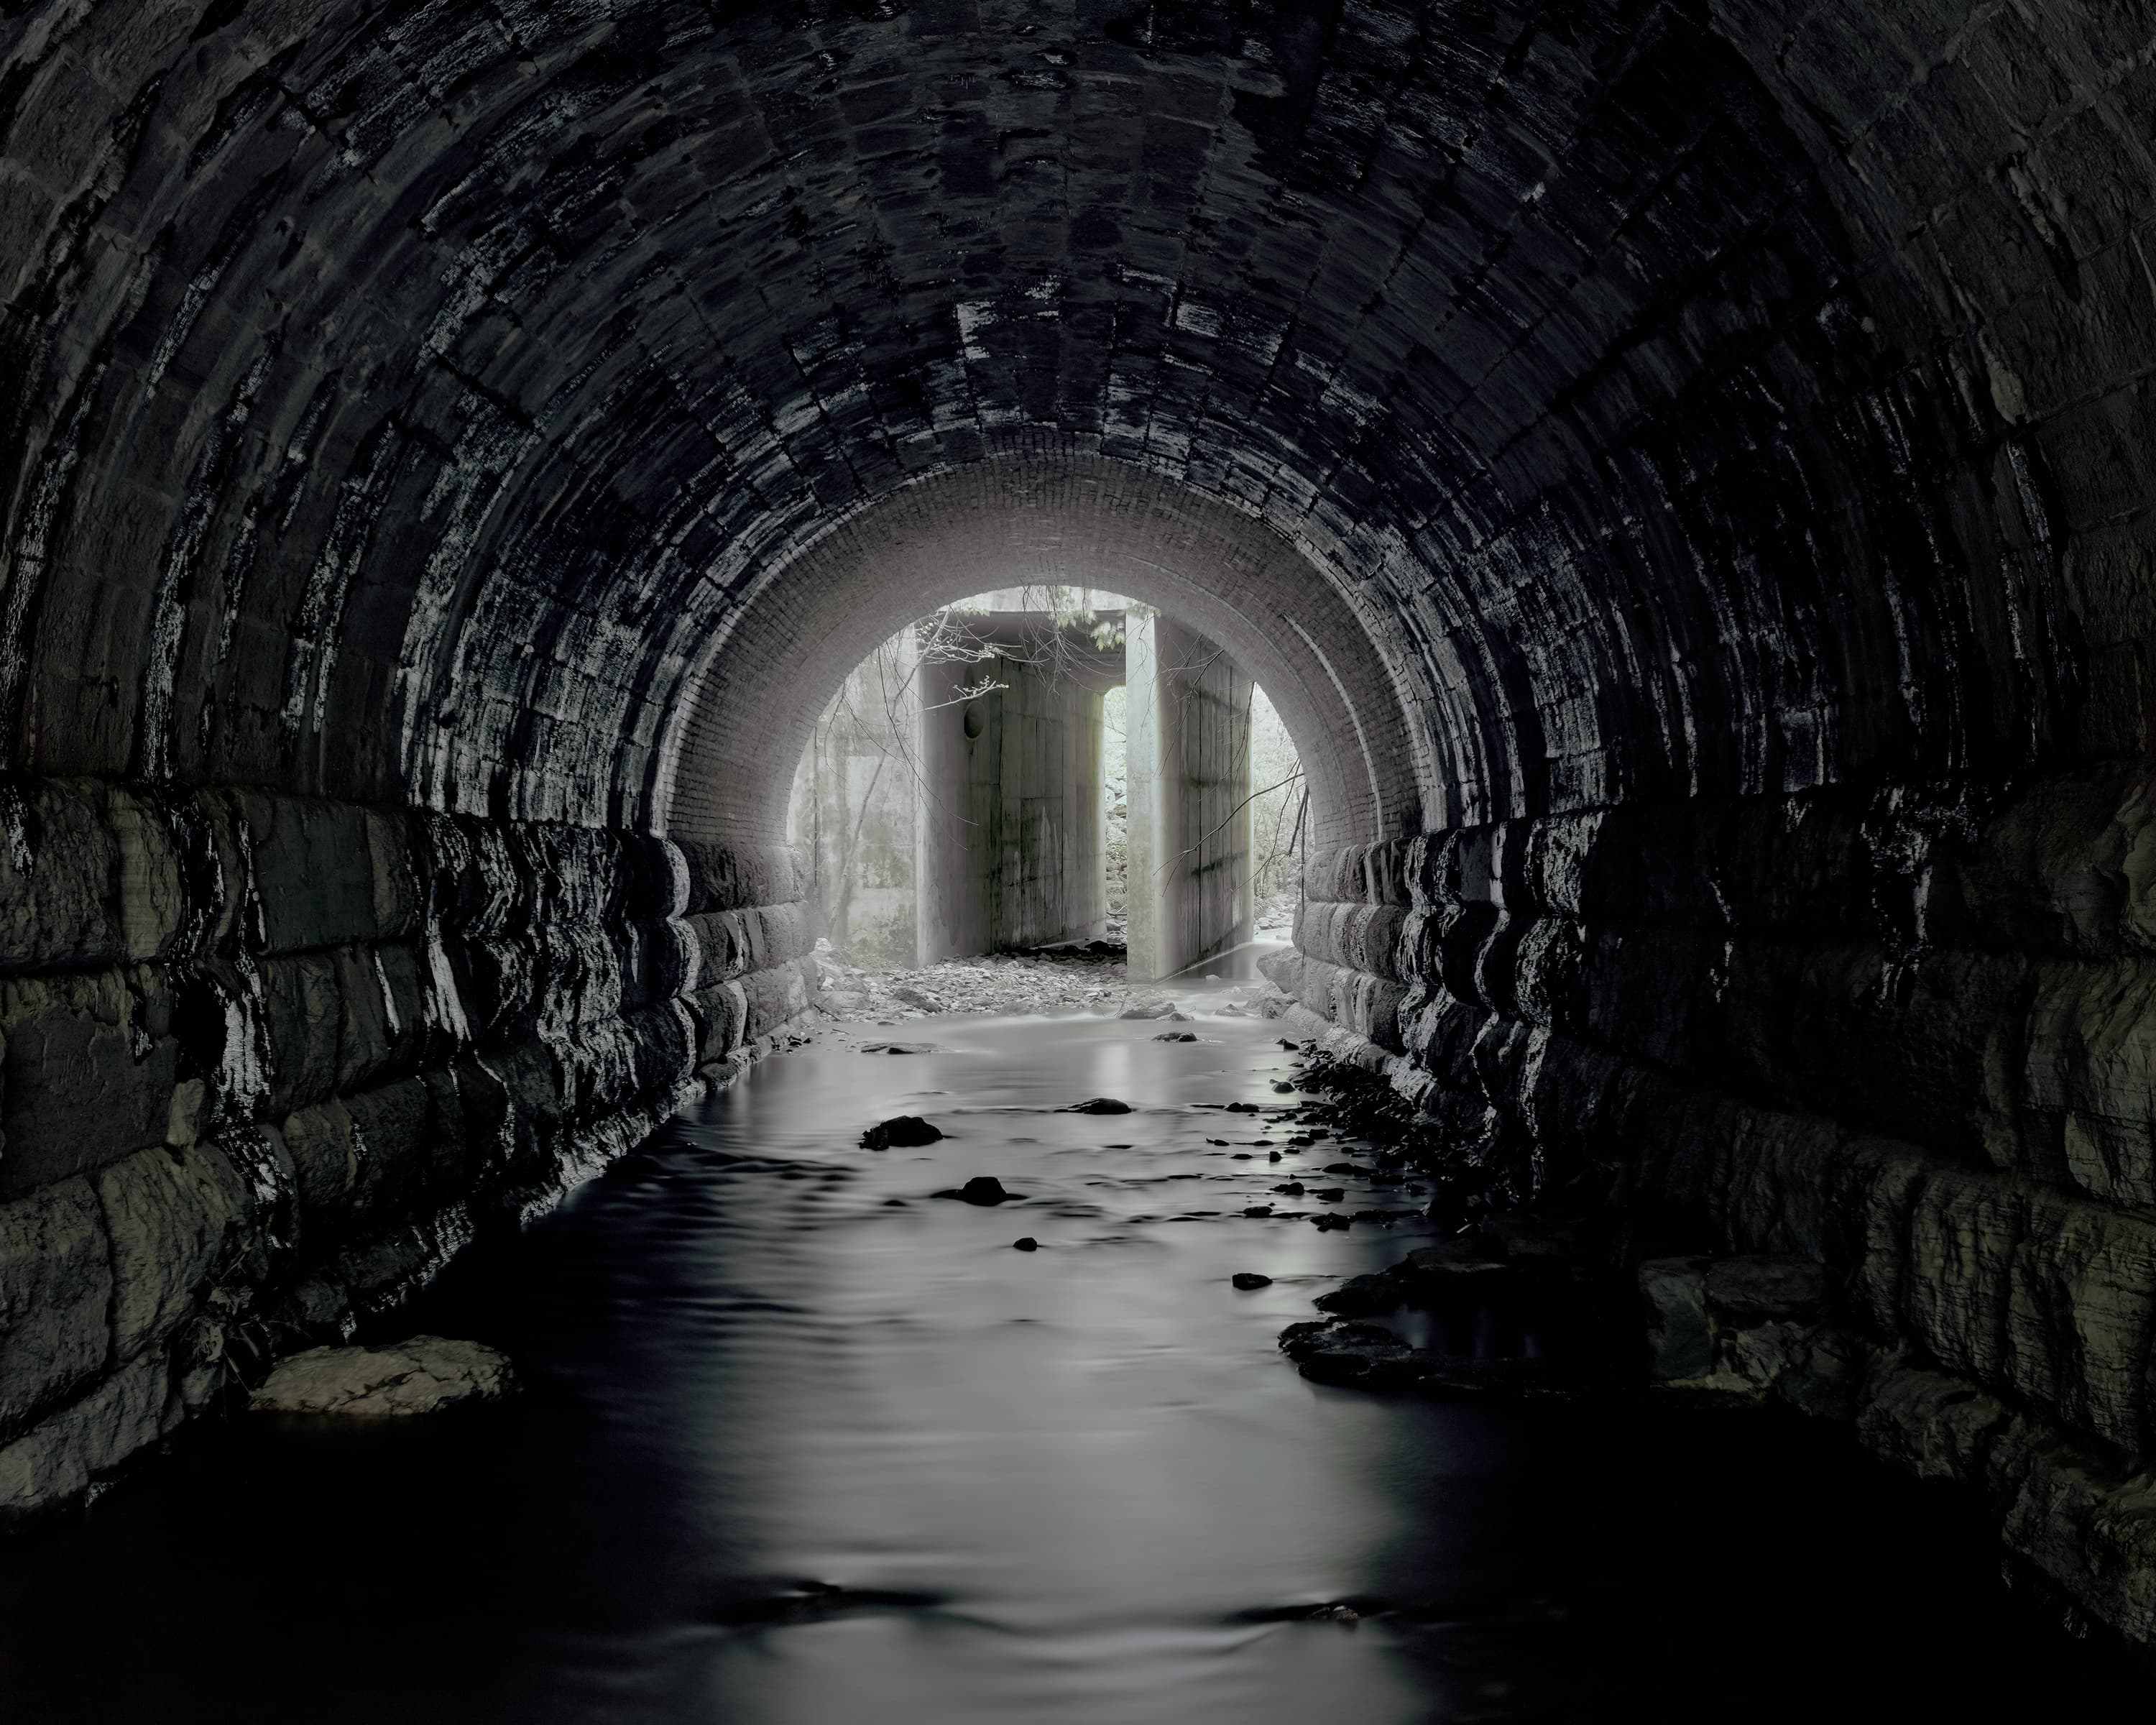 A stream runs through a dark tunnel lined with stones, at the end in the daylight are two abandoned concrete piers.